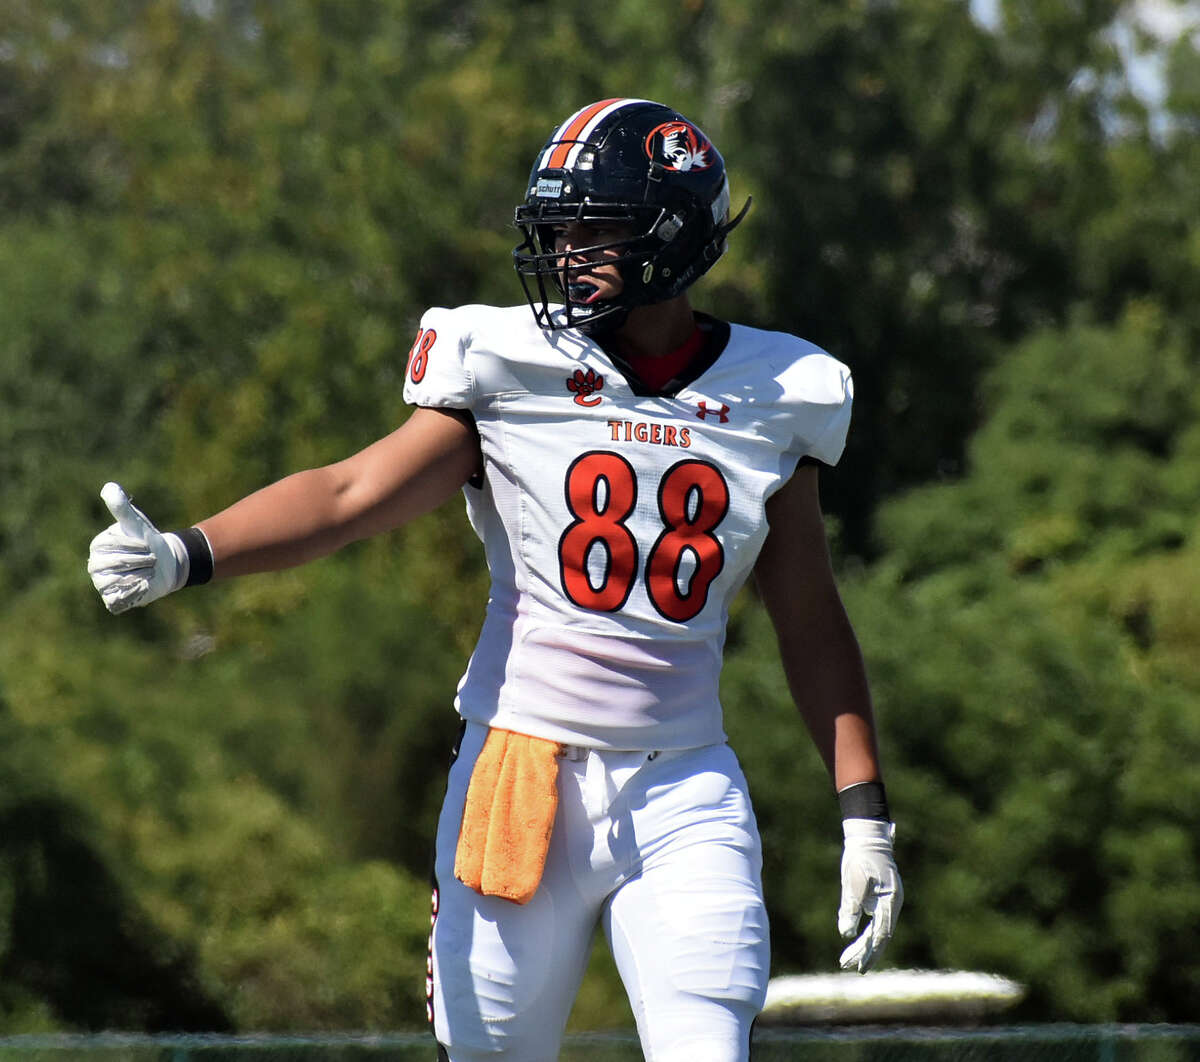 Edwardsville's Iose Epenesa lines up at tight end during a game against Belleville West in the 2021 season.